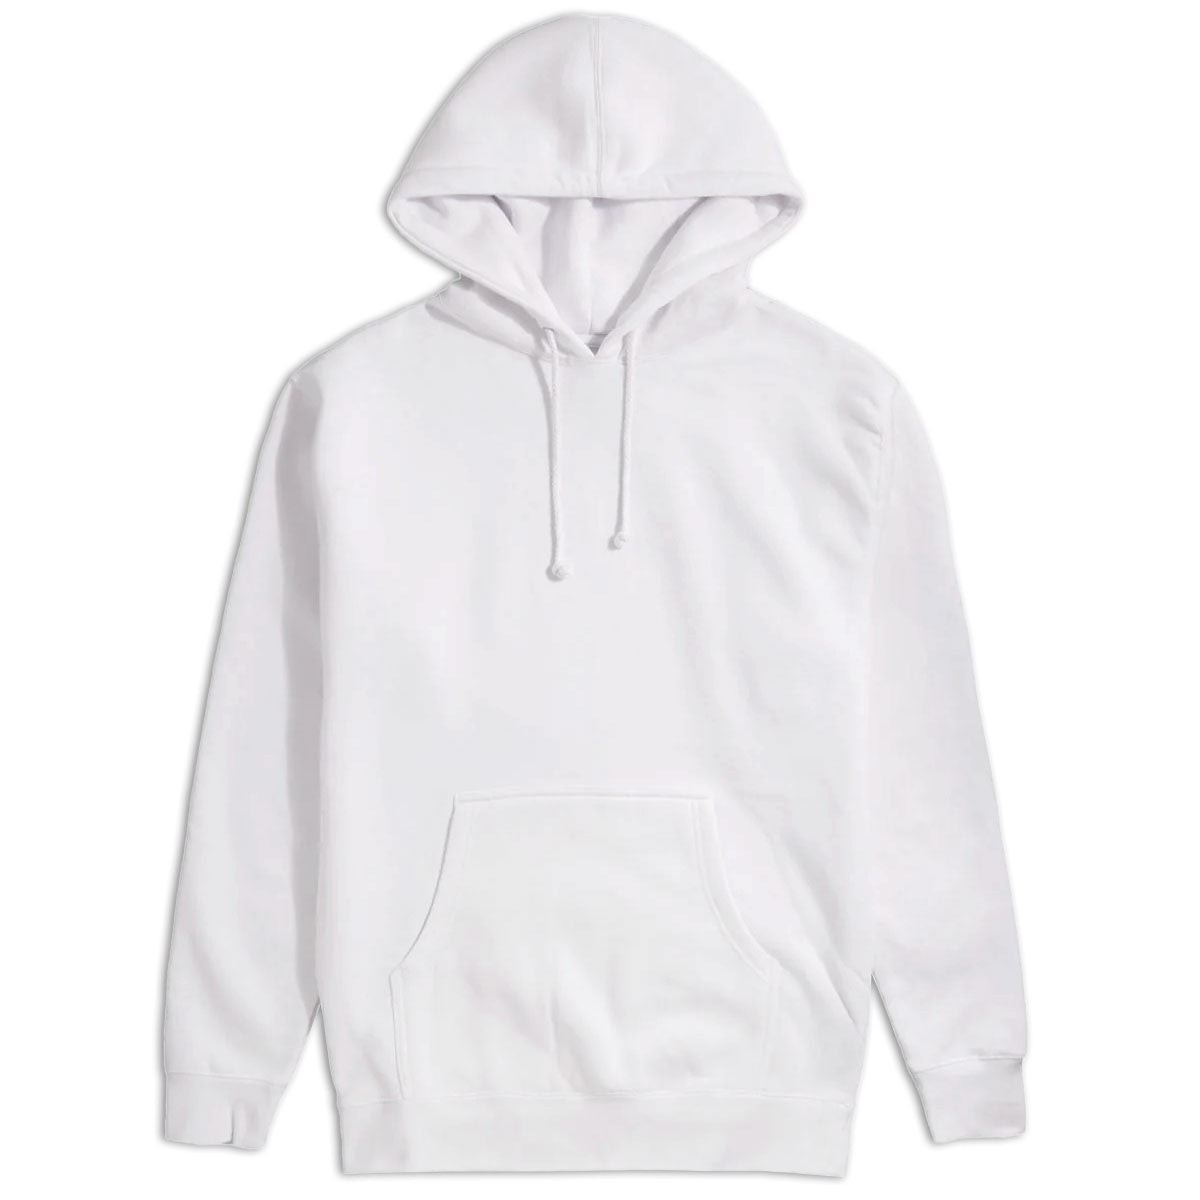 CCS Staple Pullover Hoodie - White image 1